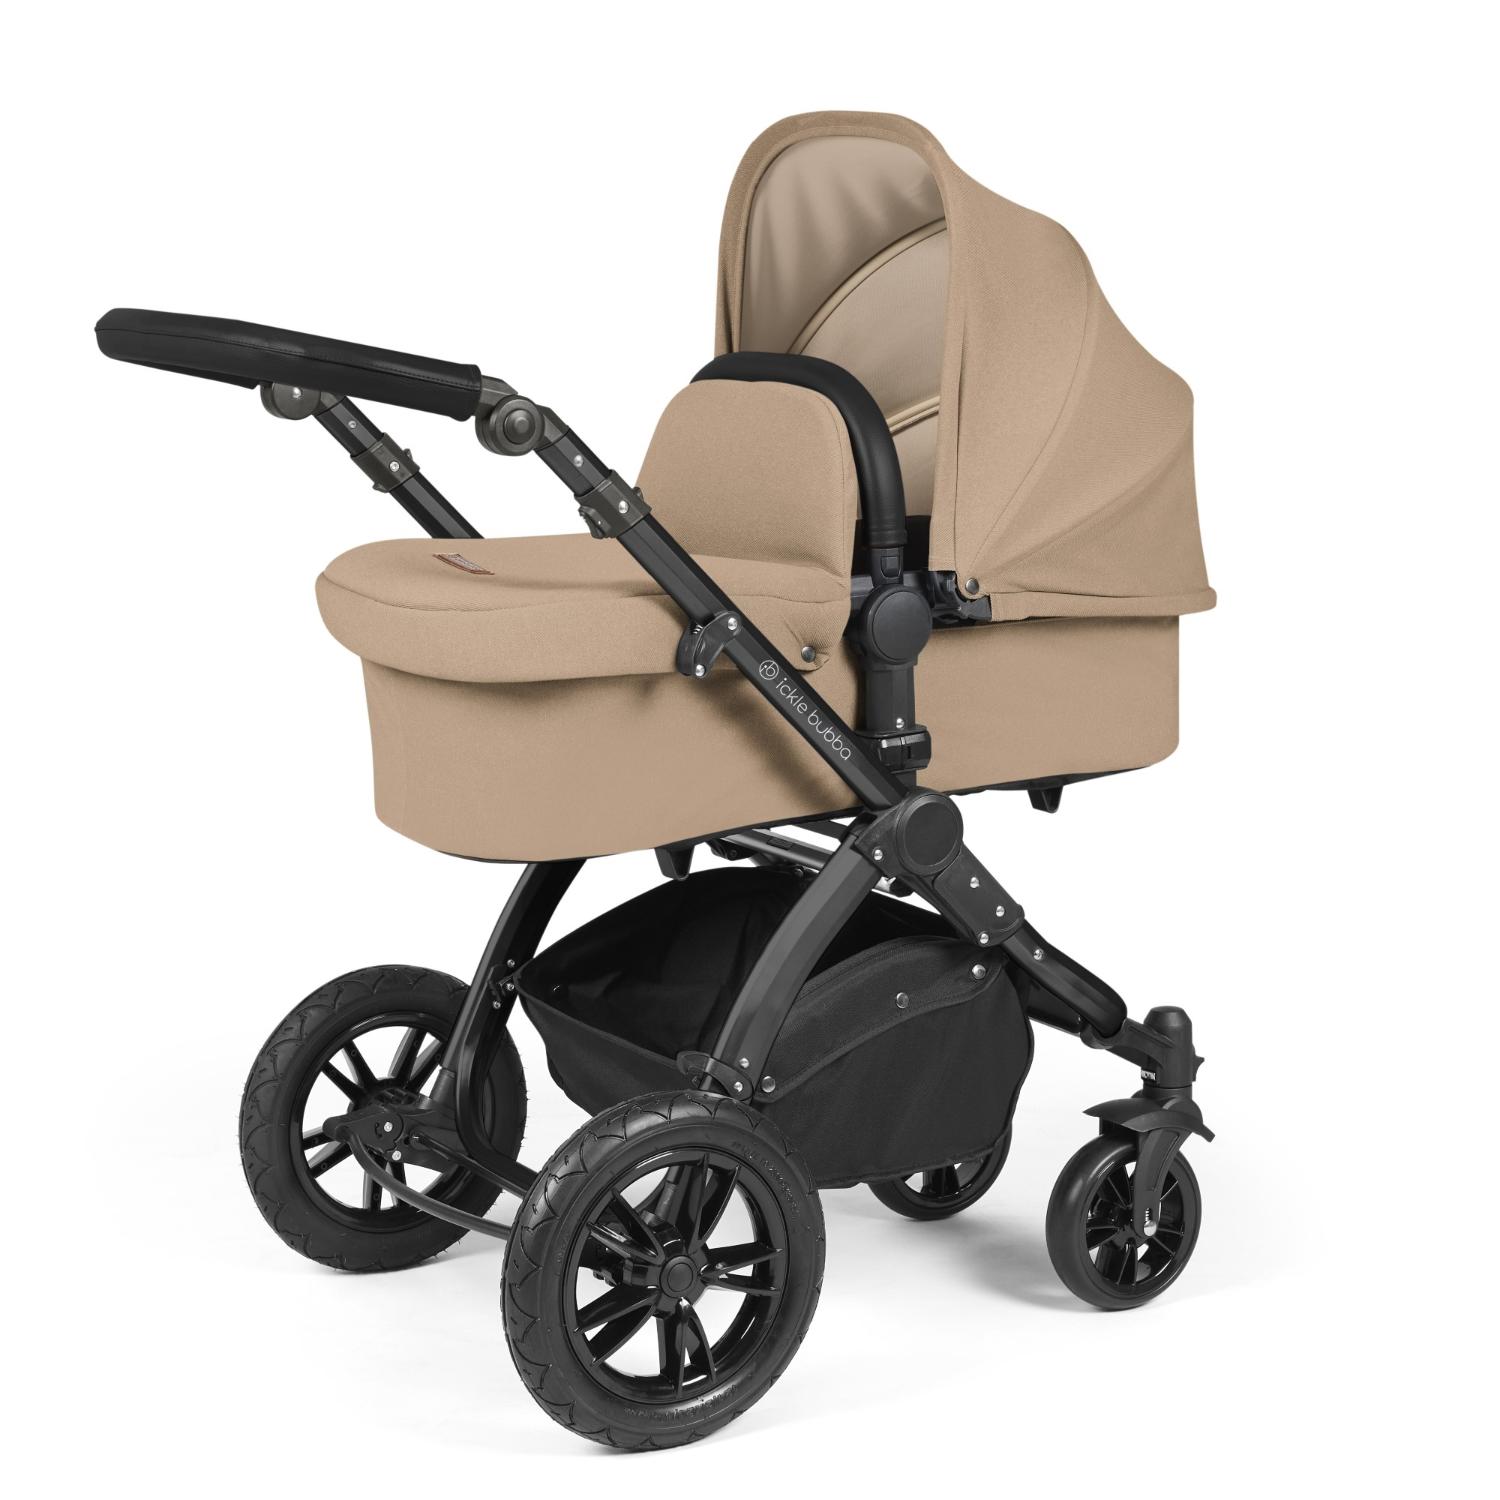 Ickle Bubba Stomp Luxe Pushchair with carrycot attached in Desert beige colour